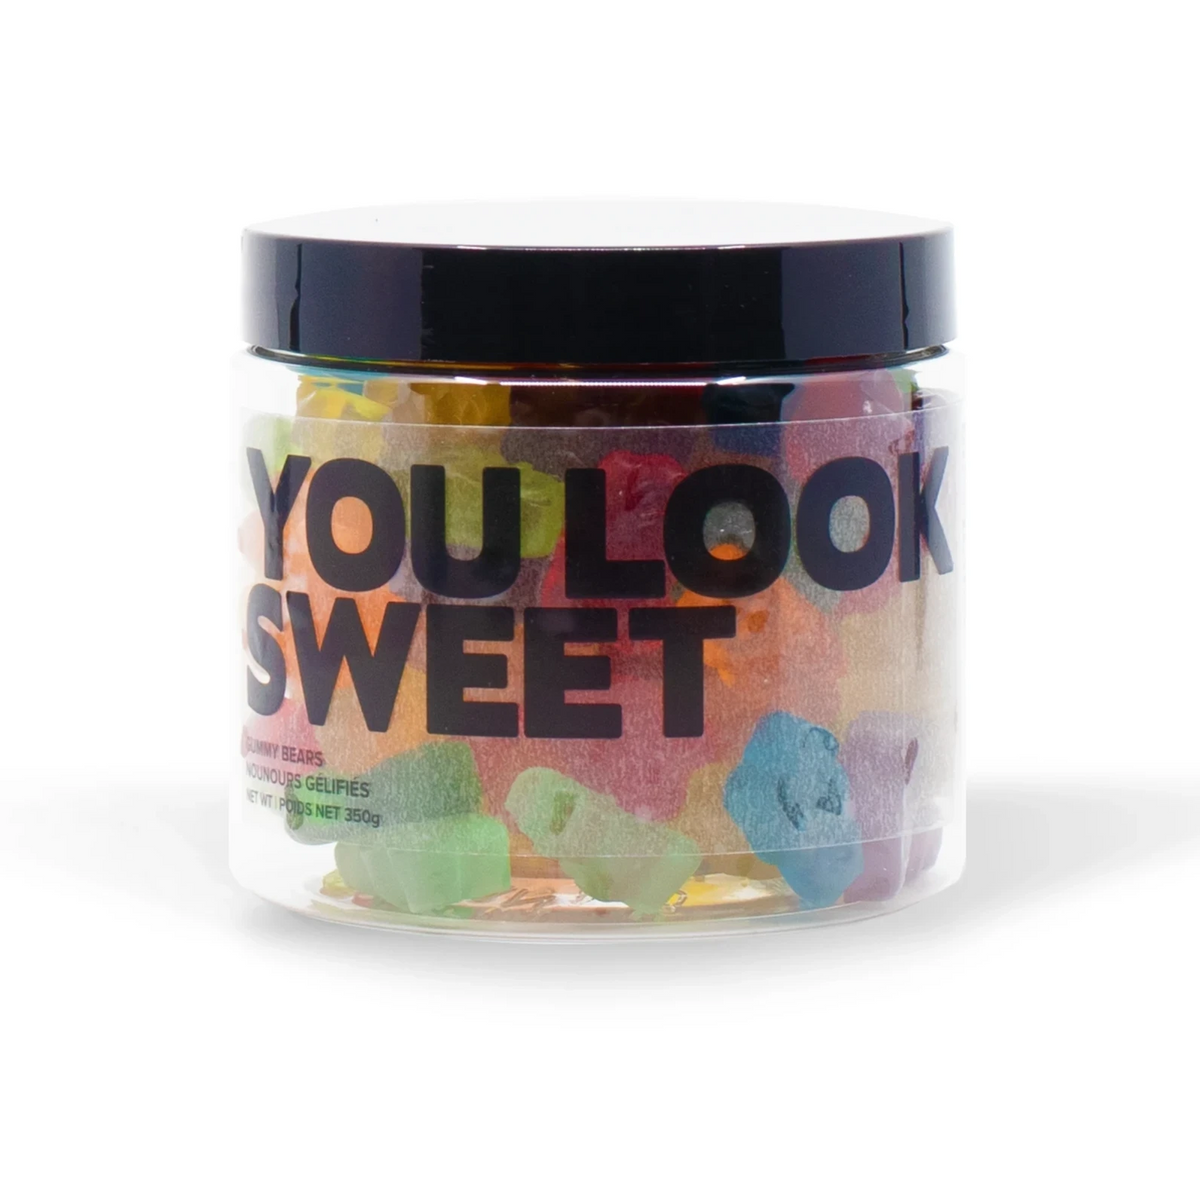 &quot;You Look Sweet&quot; Candy Tub